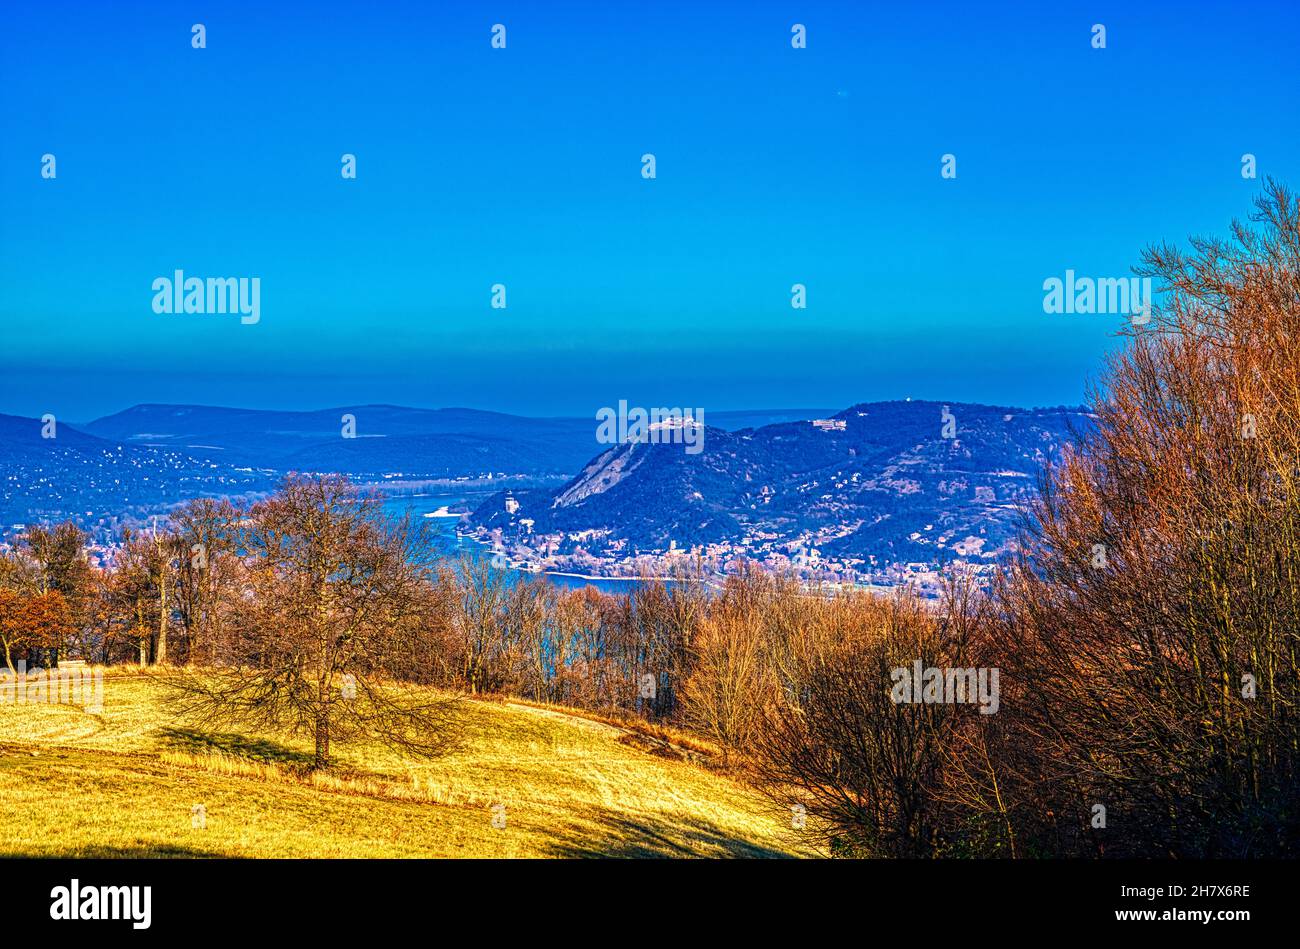 Fall landscape in the Pilis mountains Stock Photo